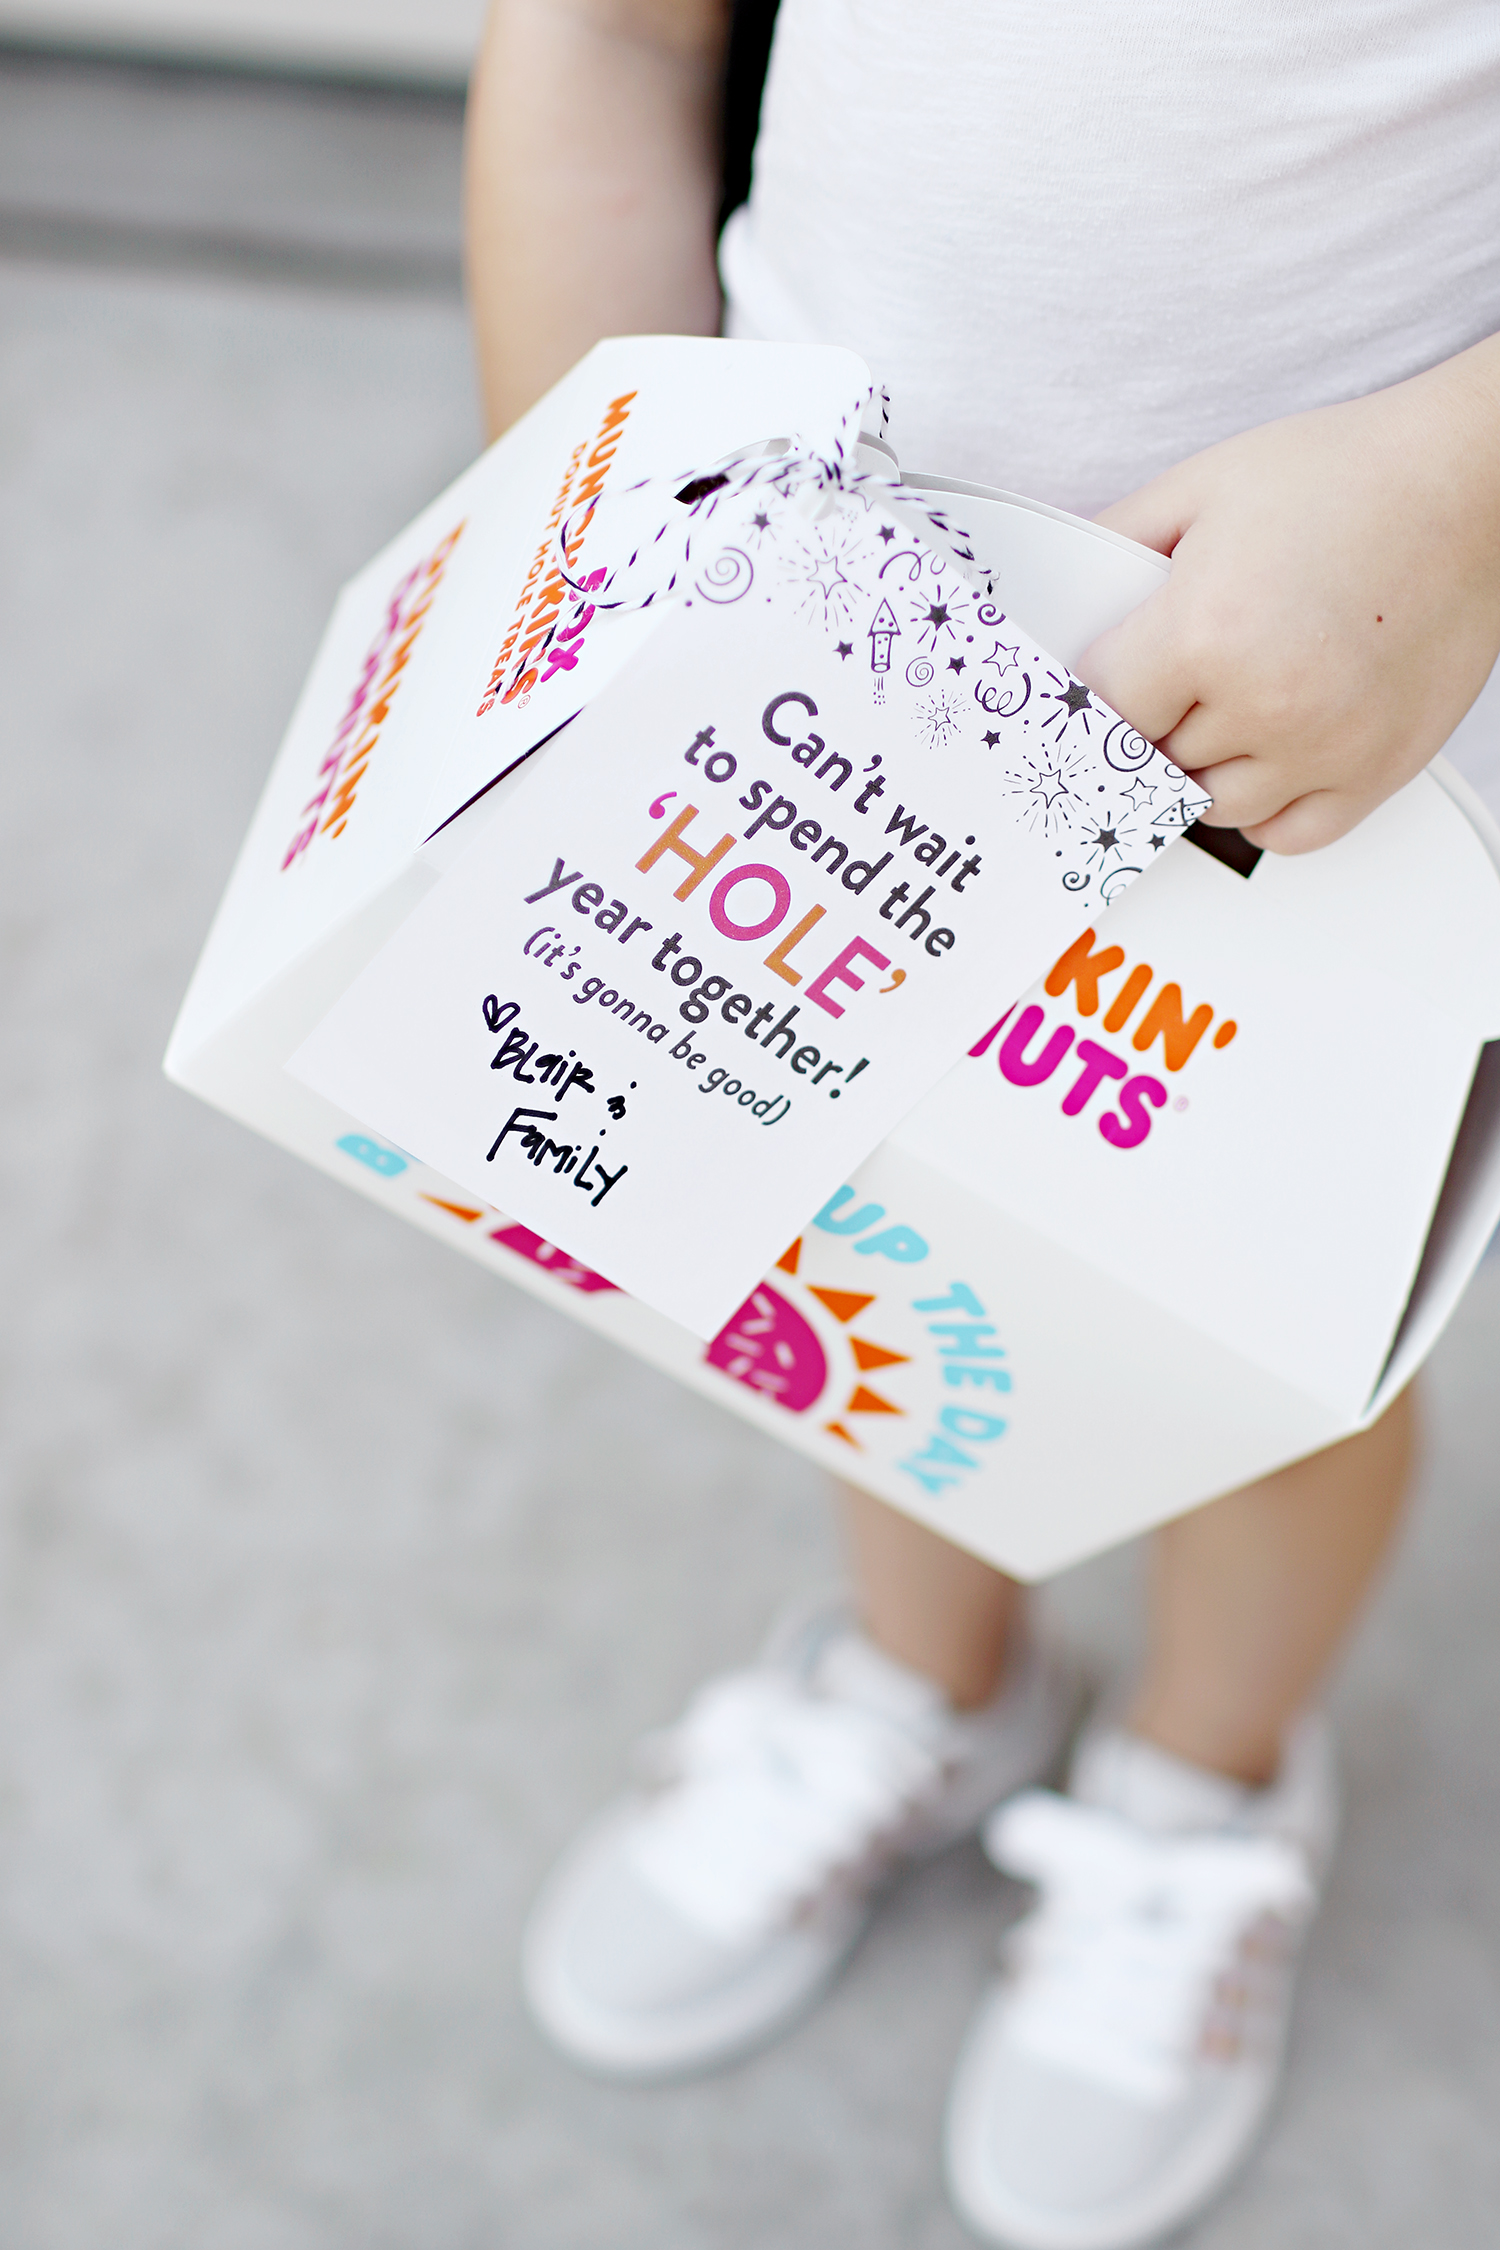 I wanted to share a quick and super easy back-to-school teacher gift idea that you and your little ones can put together for the first day of school! And absolutely - I have you covered with the free printable! Catch it all now over on KaraLayne.com